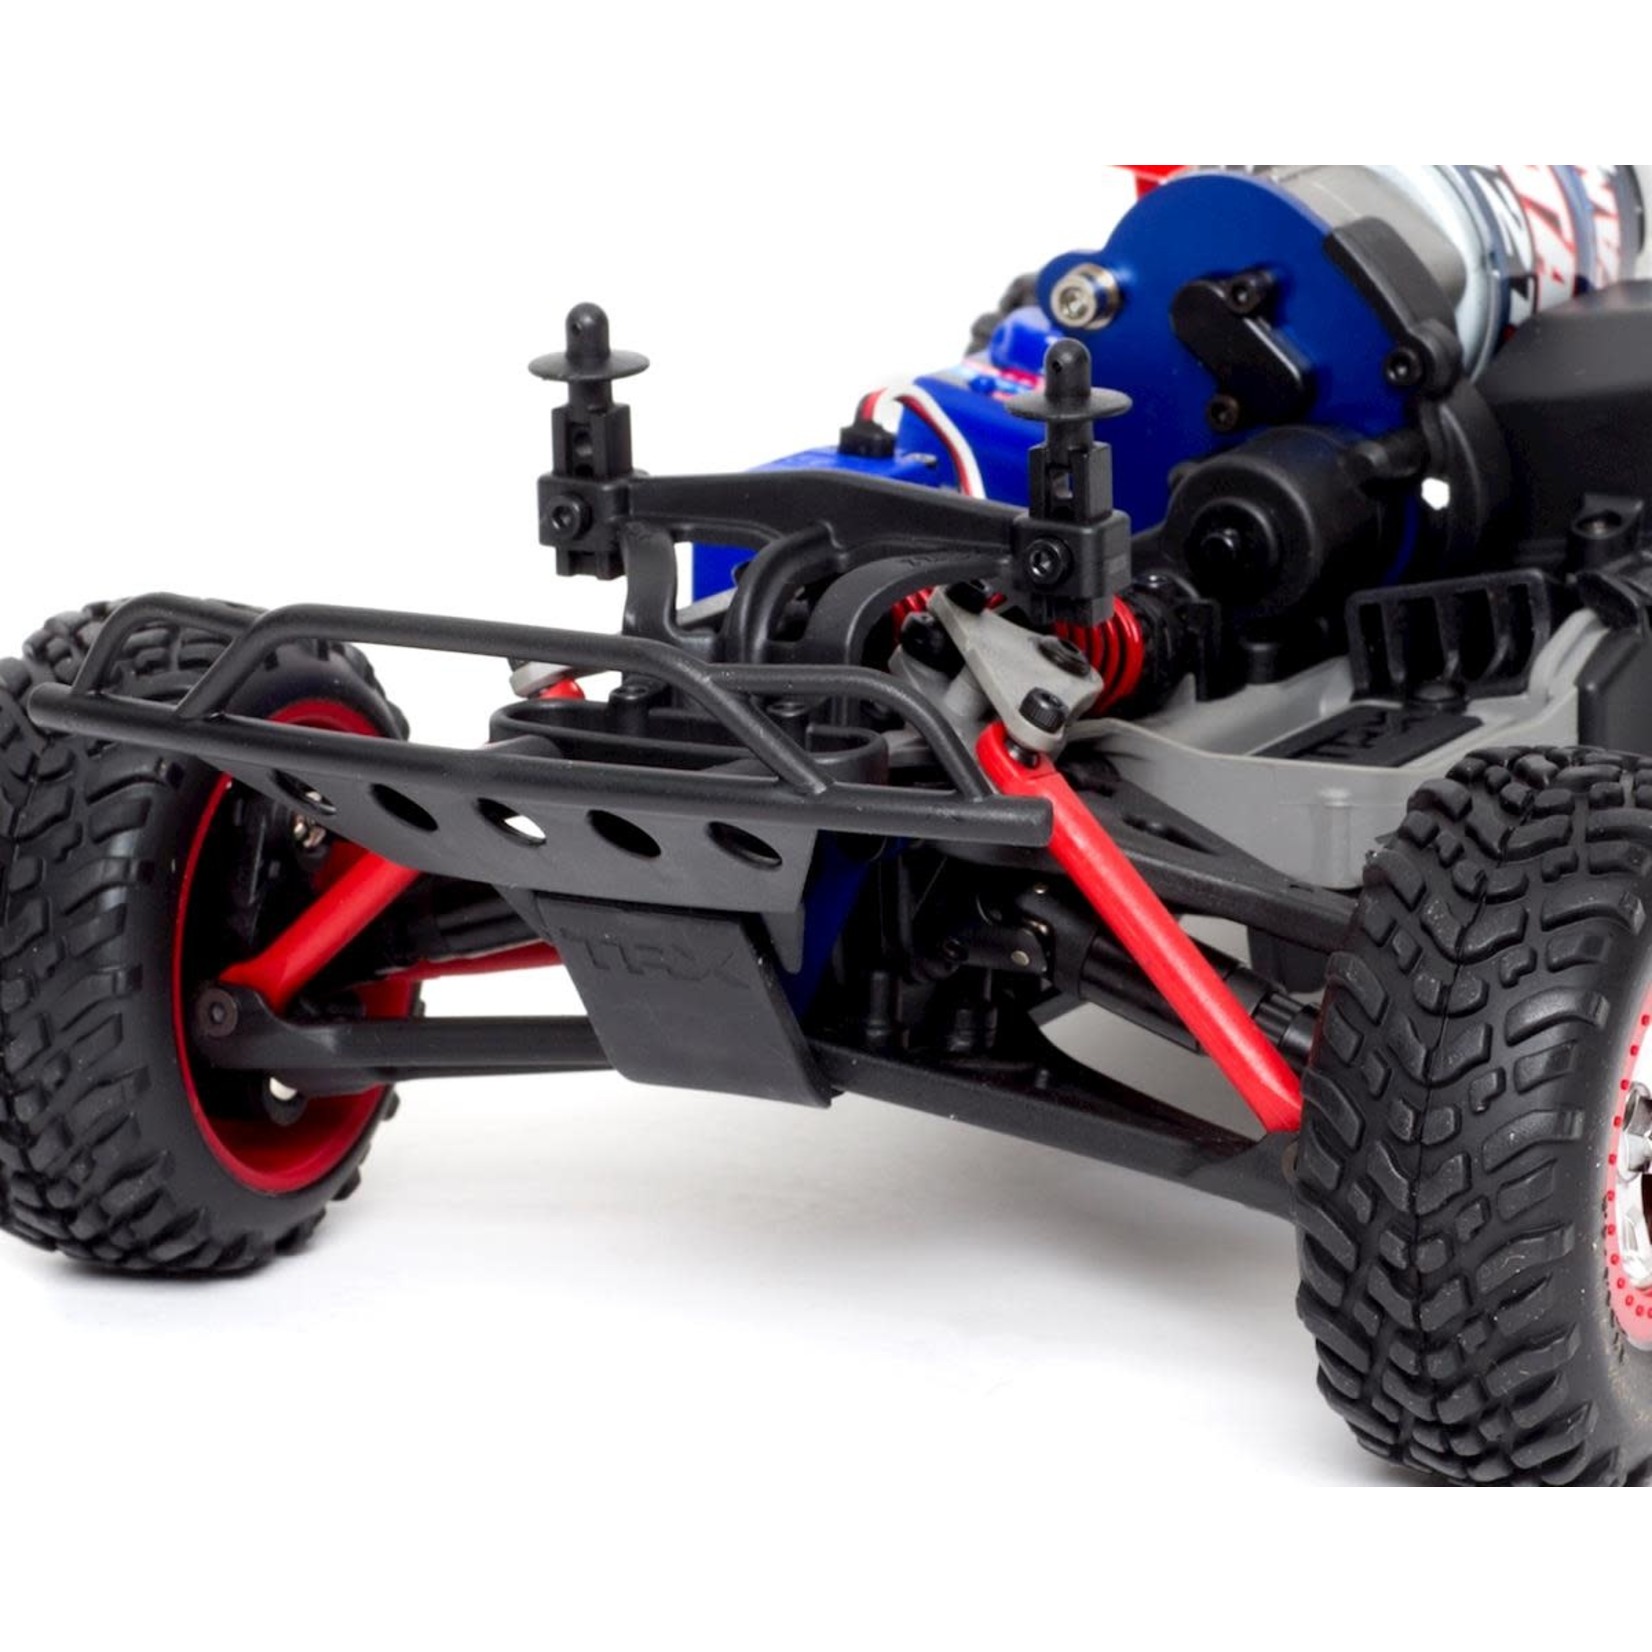 Traxxas Traxxas Slash 4x4 1/16 4WD RTR Short Course Truck (Mike Jenkins) w/TQ 2.4GHz Radio, Battery & DC Charger #70054-1-Mike